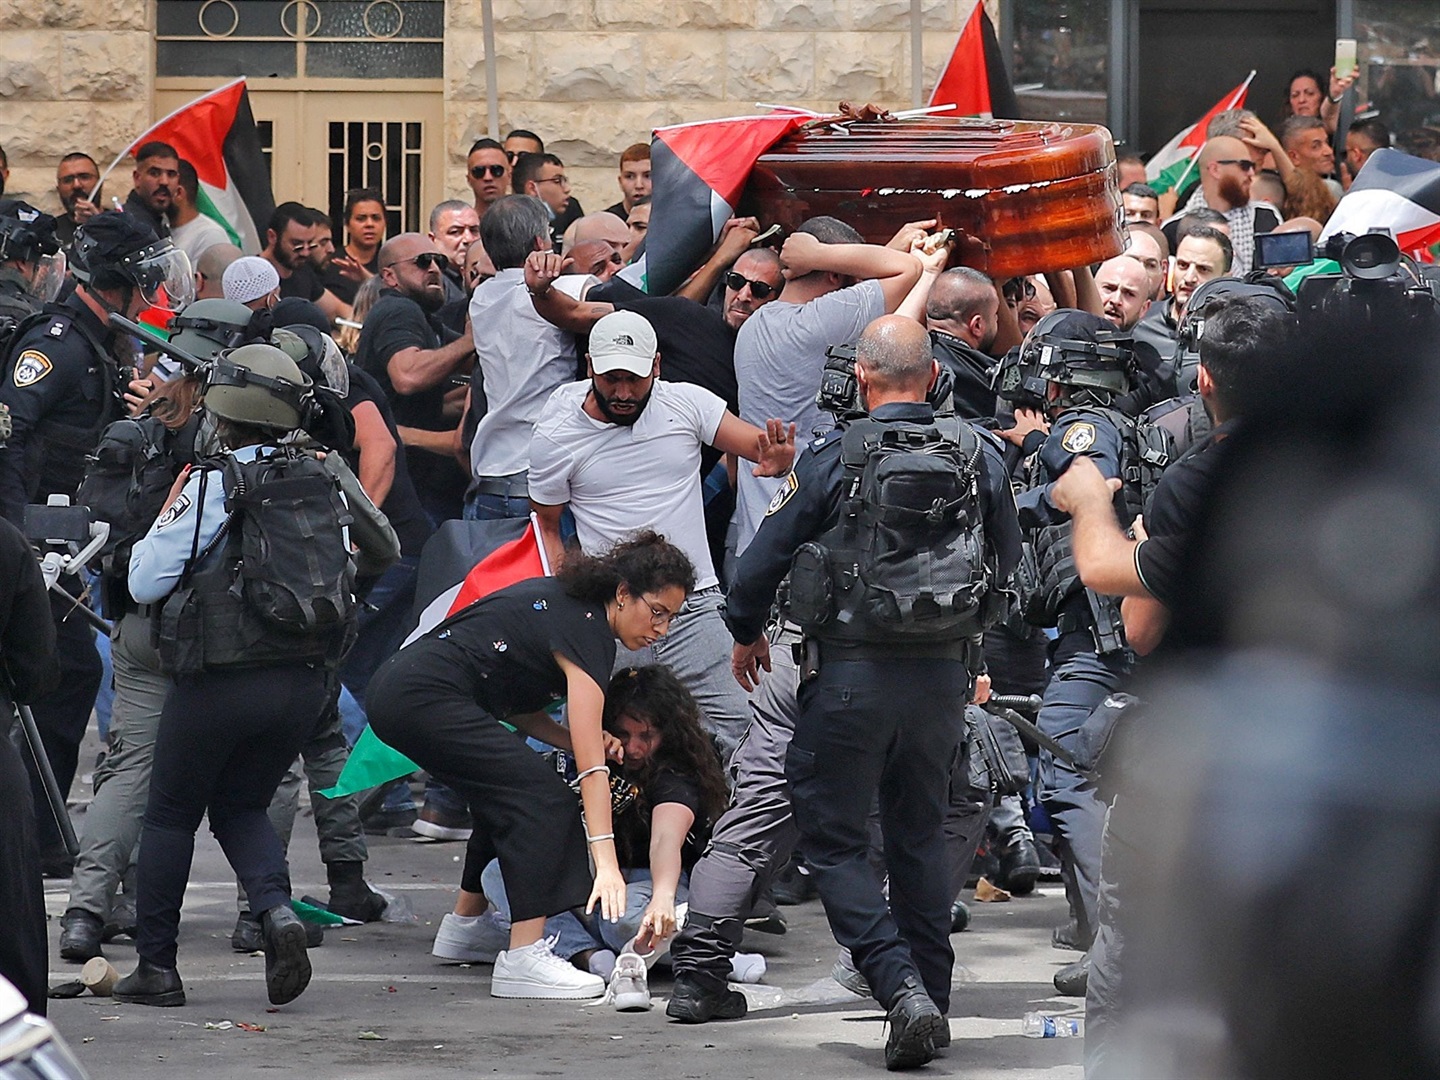 Violence erupts between Israeli security forces and Palestinian mourners carrying the casket of slain Al-Jazeera journalist Shireen Abu Akleh out of a hospital, before being transported to a church and then her resting place, in Jerusalem, on May 13, 2022. Photo by AHMAD GHARABLI/AFP via Getty Images